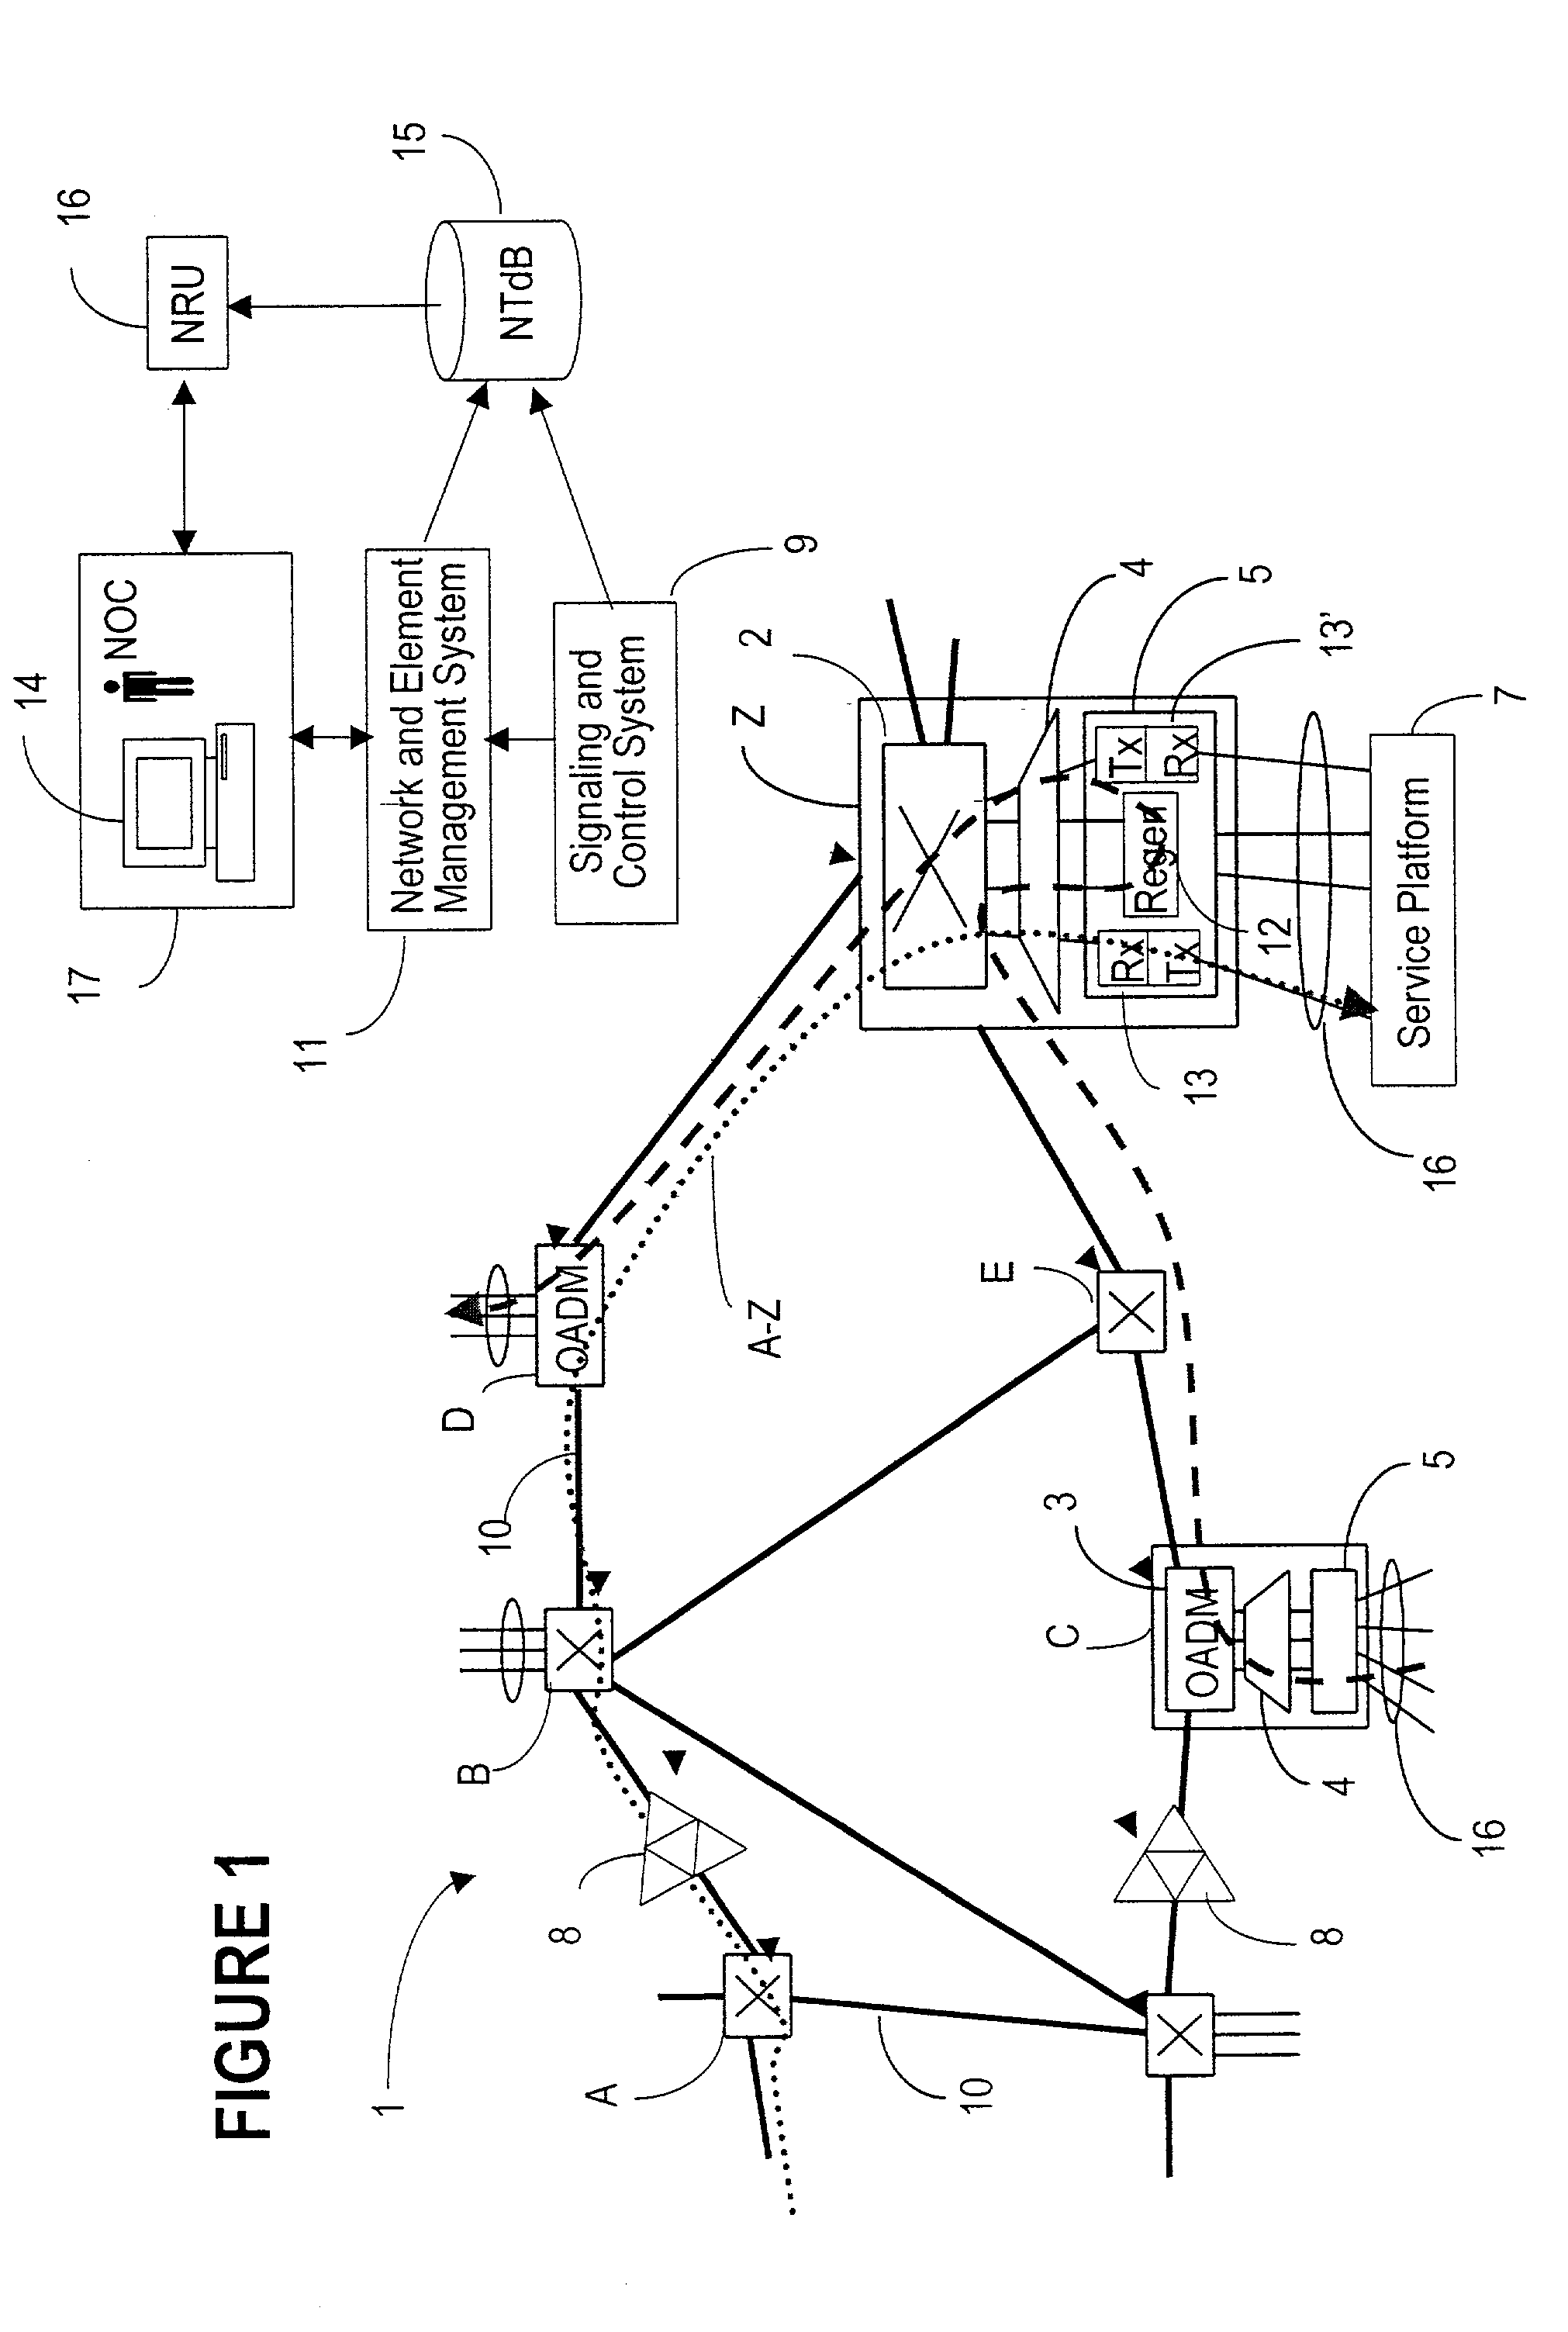 Wavelength routing and switching mechanism for a photonic transport network